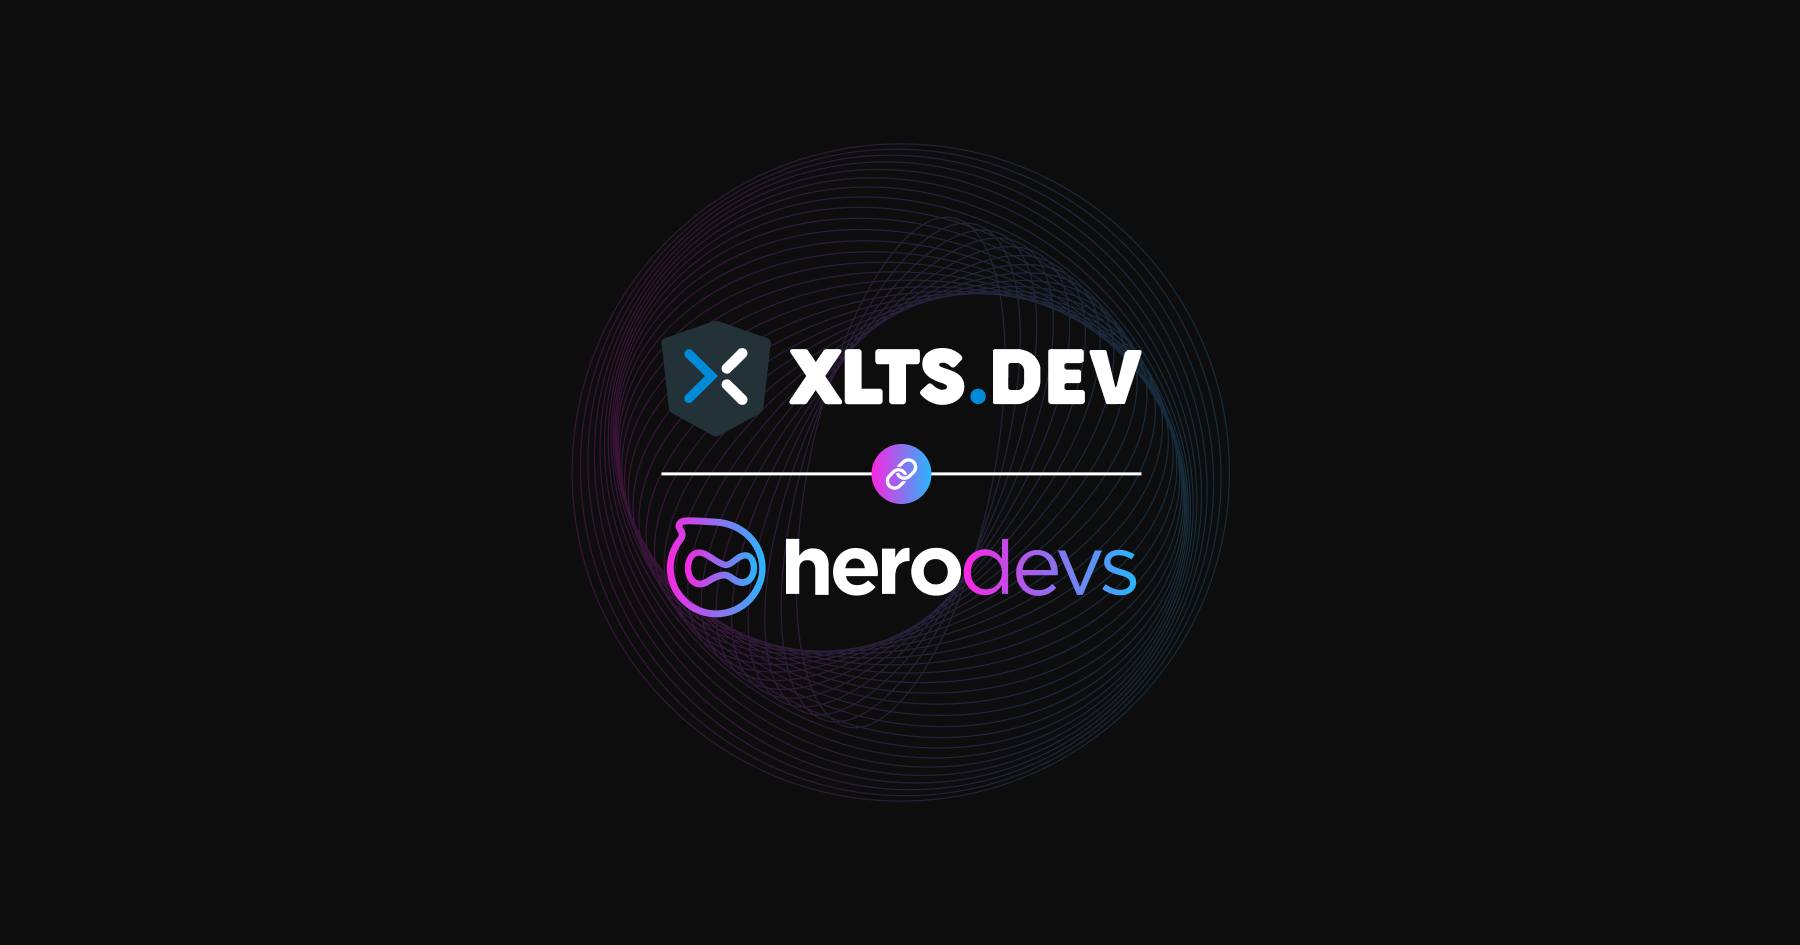 XLTS and HeroDevs, connected via a metaphoric chain link.